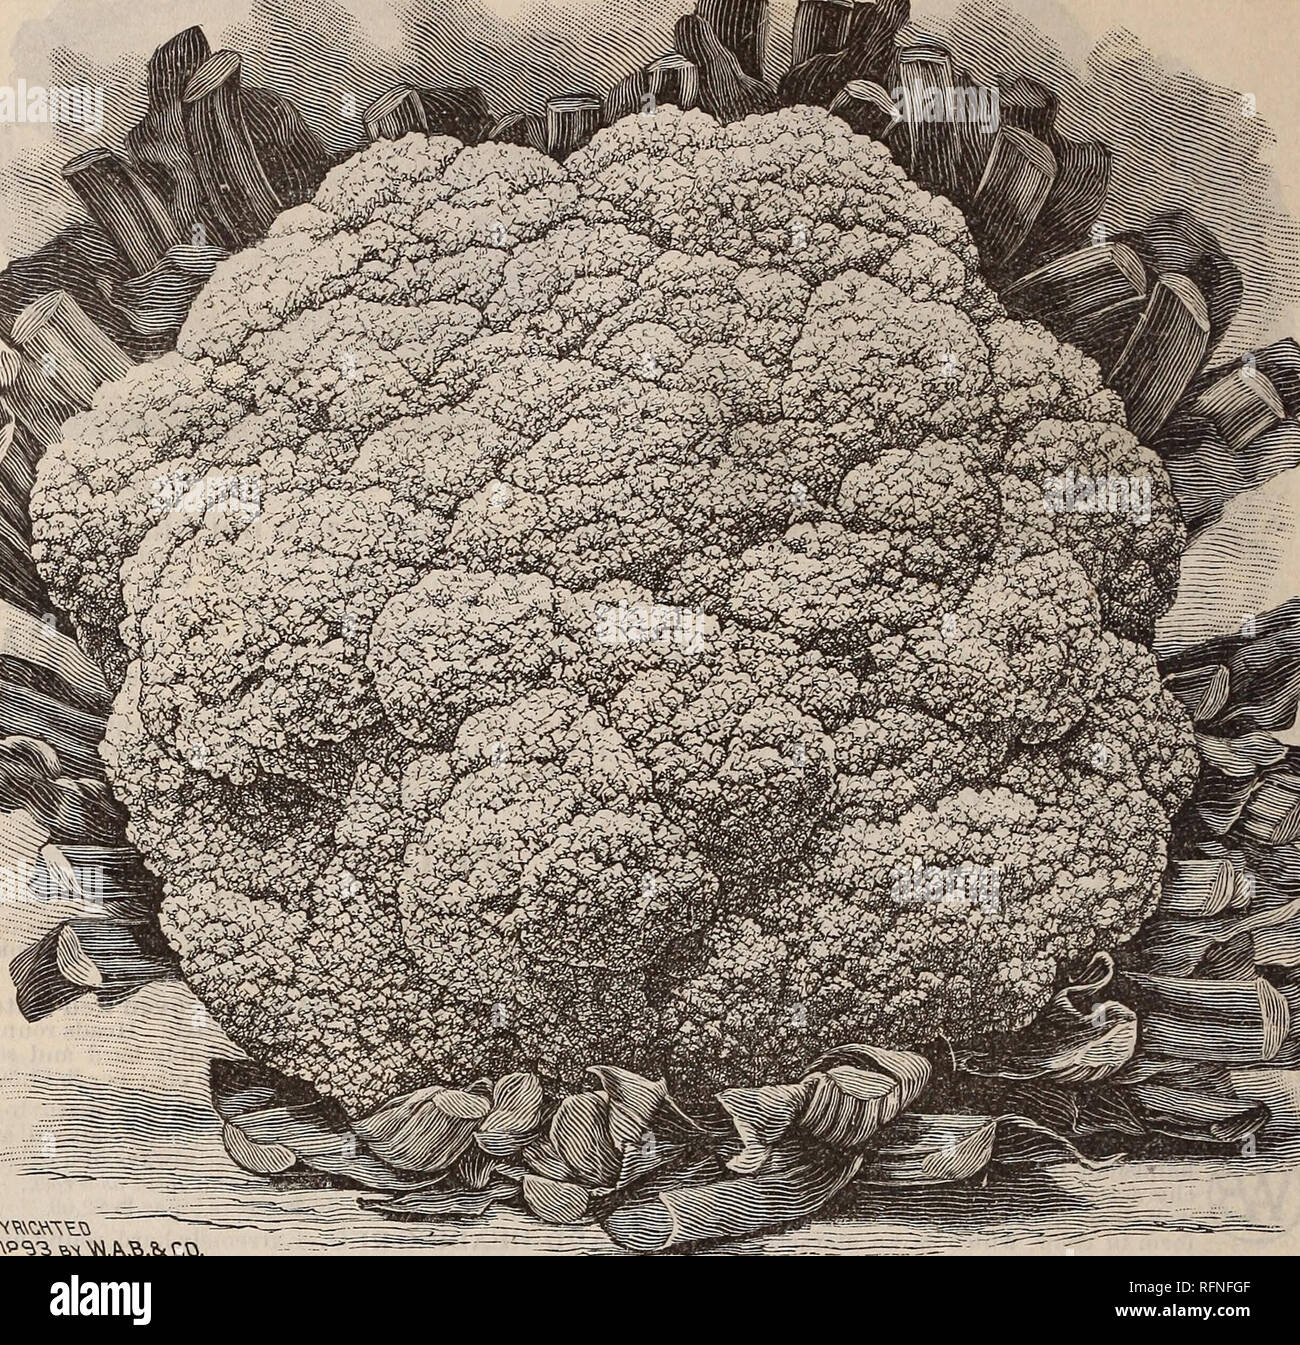 . Burpee's farm annual written at Fordhook Farm. Nurseries (Horticulture) Pennsylvania Philadelphia Catalogs; Vegetables Seeds Catalogs; Plants, Ornamental Catalogs; Flowers Seeds Catalogs. 34 W. ATLEE BURPEE &amp; CO., PHILADELPHIA.. BURPEE'S BEST EARLY cauliflower. Accurately engraved jrom a Photograph. Burpee's BEST EARLY Cauliflower. Named and introduced by us in 1887, this grand variety has proved to be, as claimed, the BEST EARLY Cauliflower in cultivation. It has attained its present perfection after many years' intelligent selection, and is remarkable both for its extra earliness and c Stock Photo